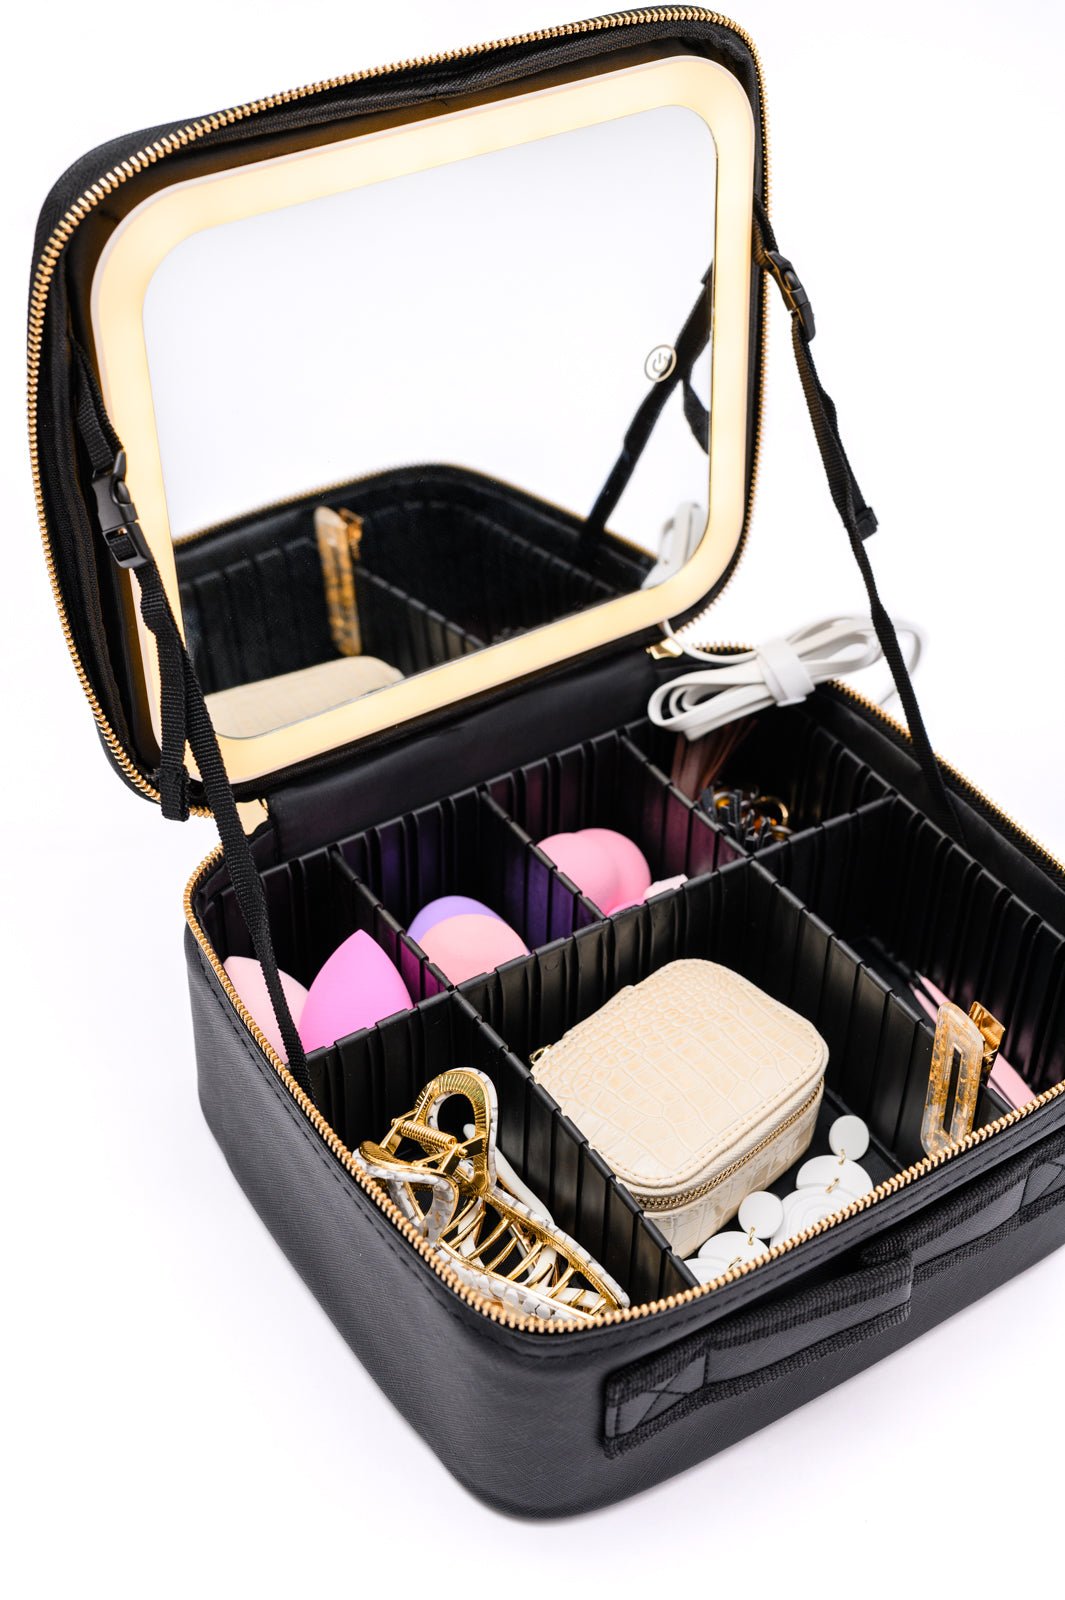 She's All That LED Makeup Case in Black - Happily Ever Atchison Shop Co.